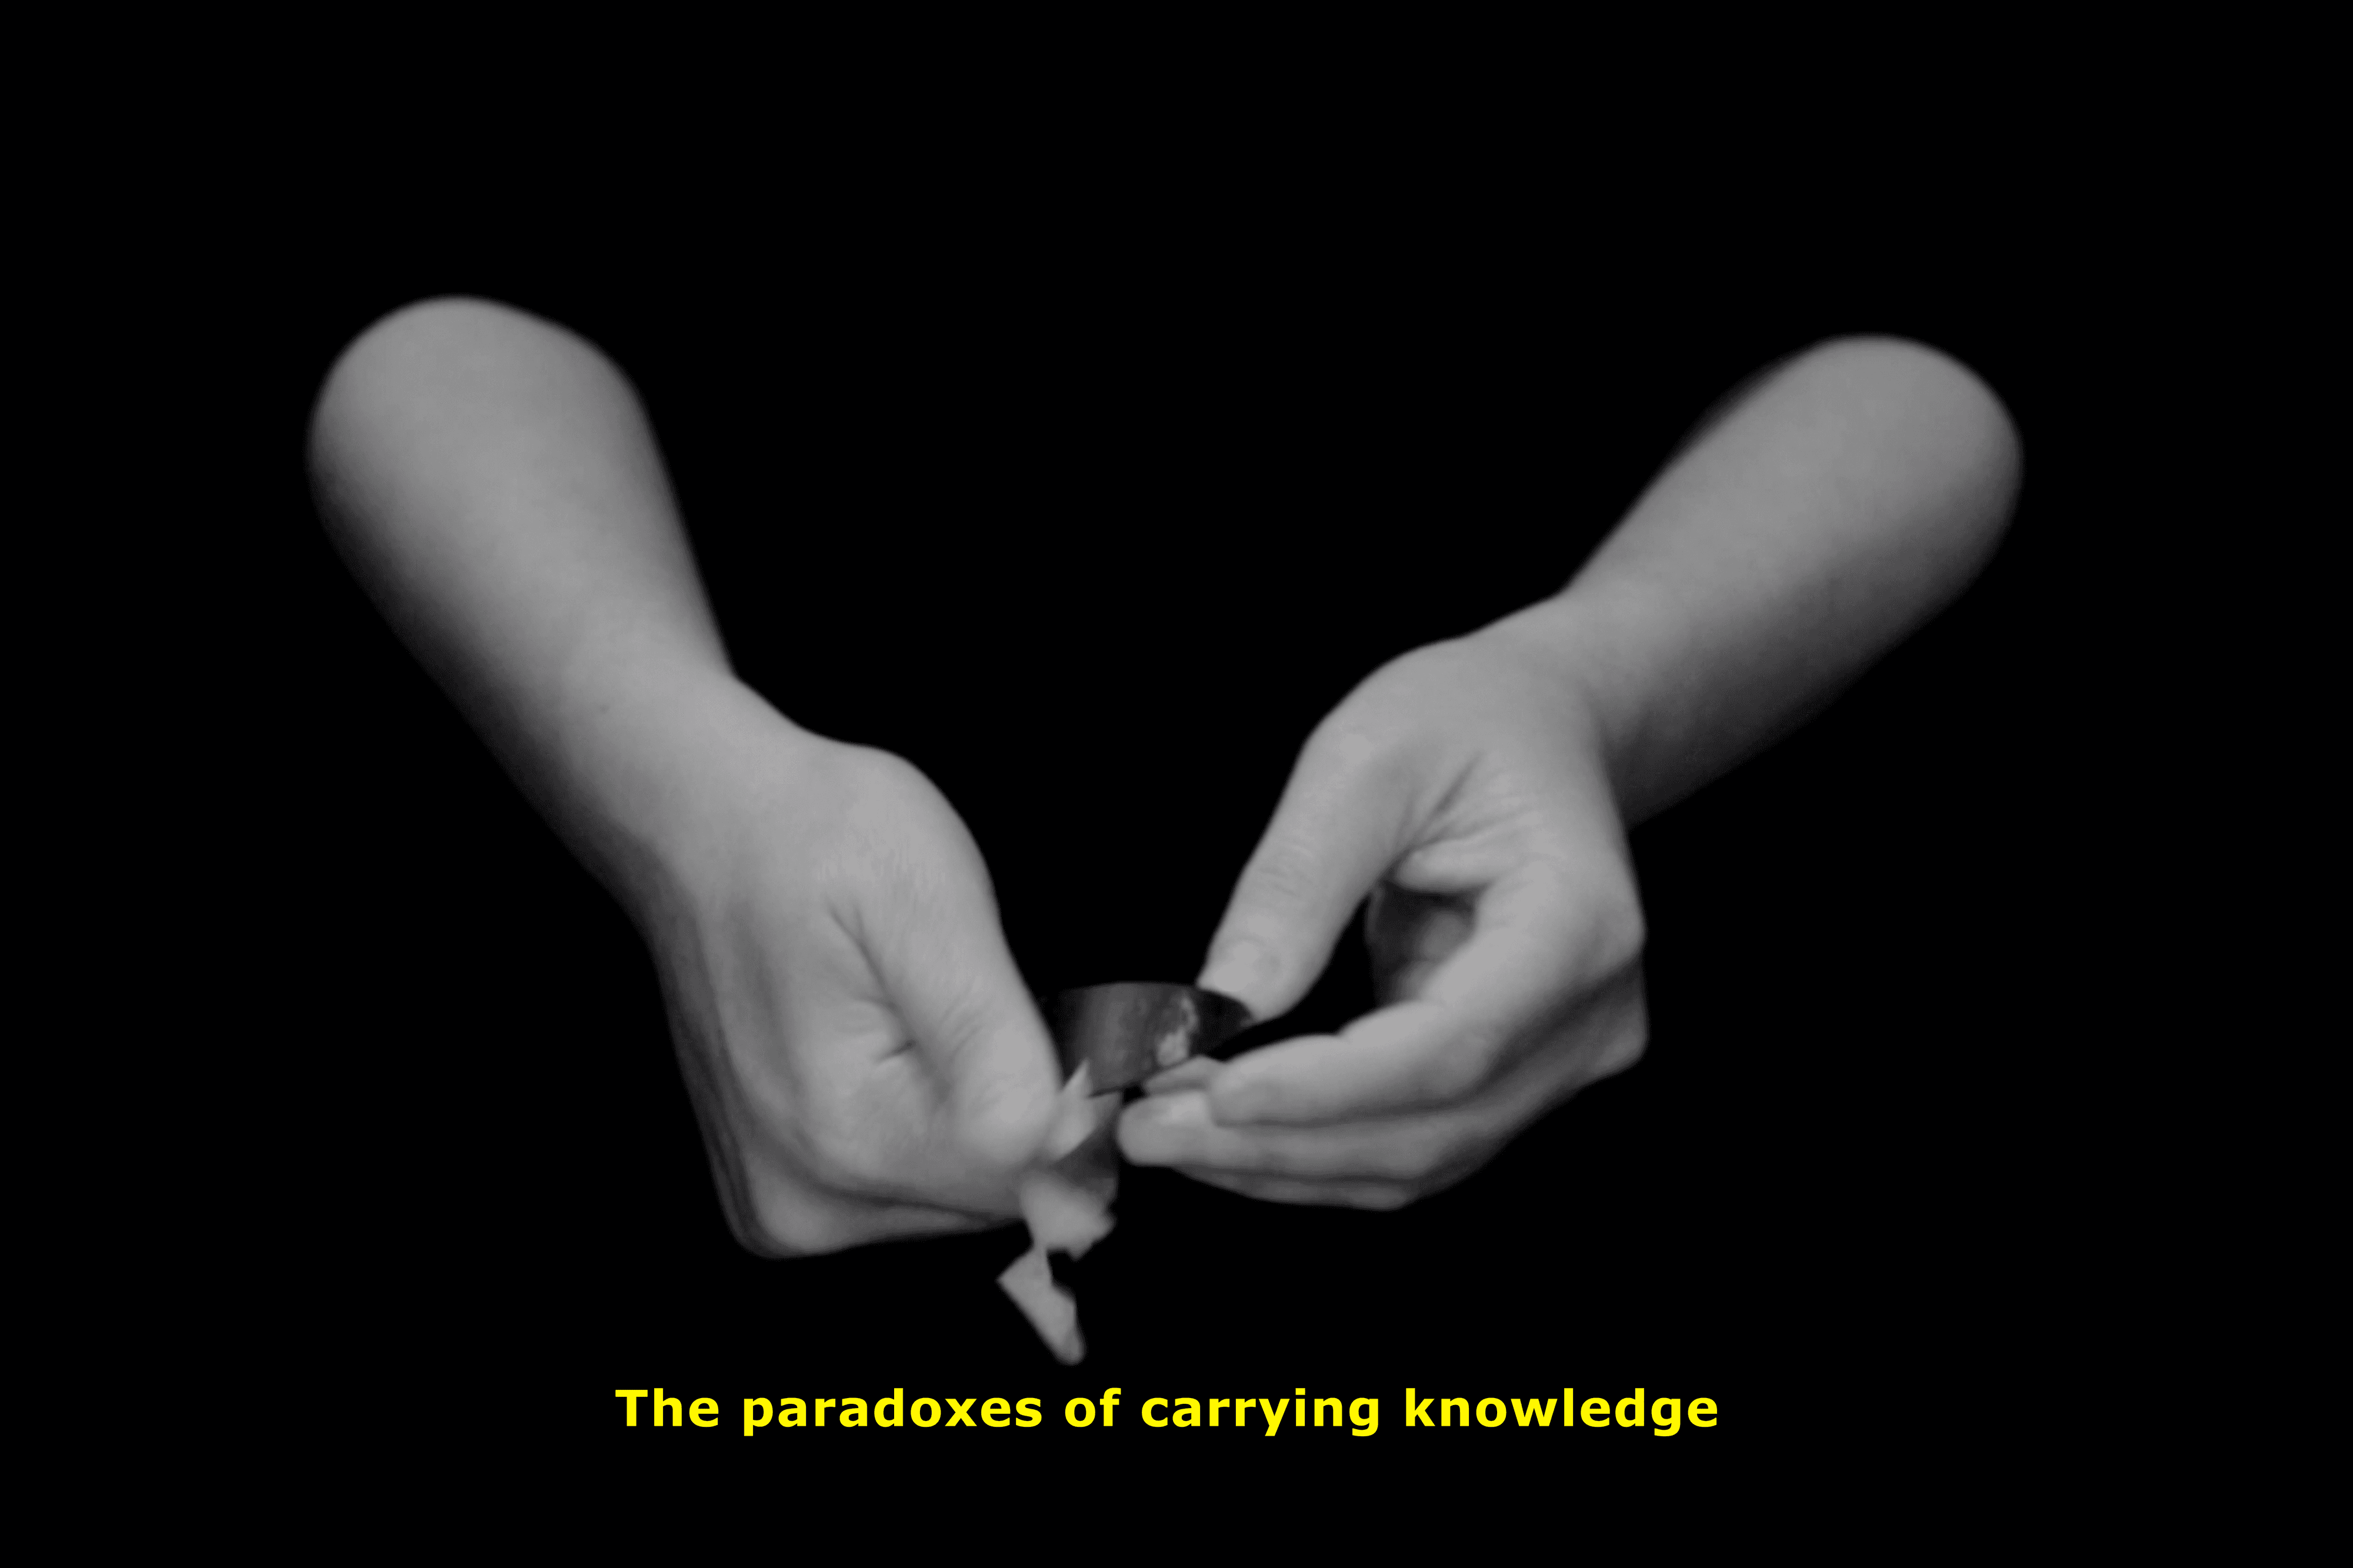 The paradoxes of carrying knowledge